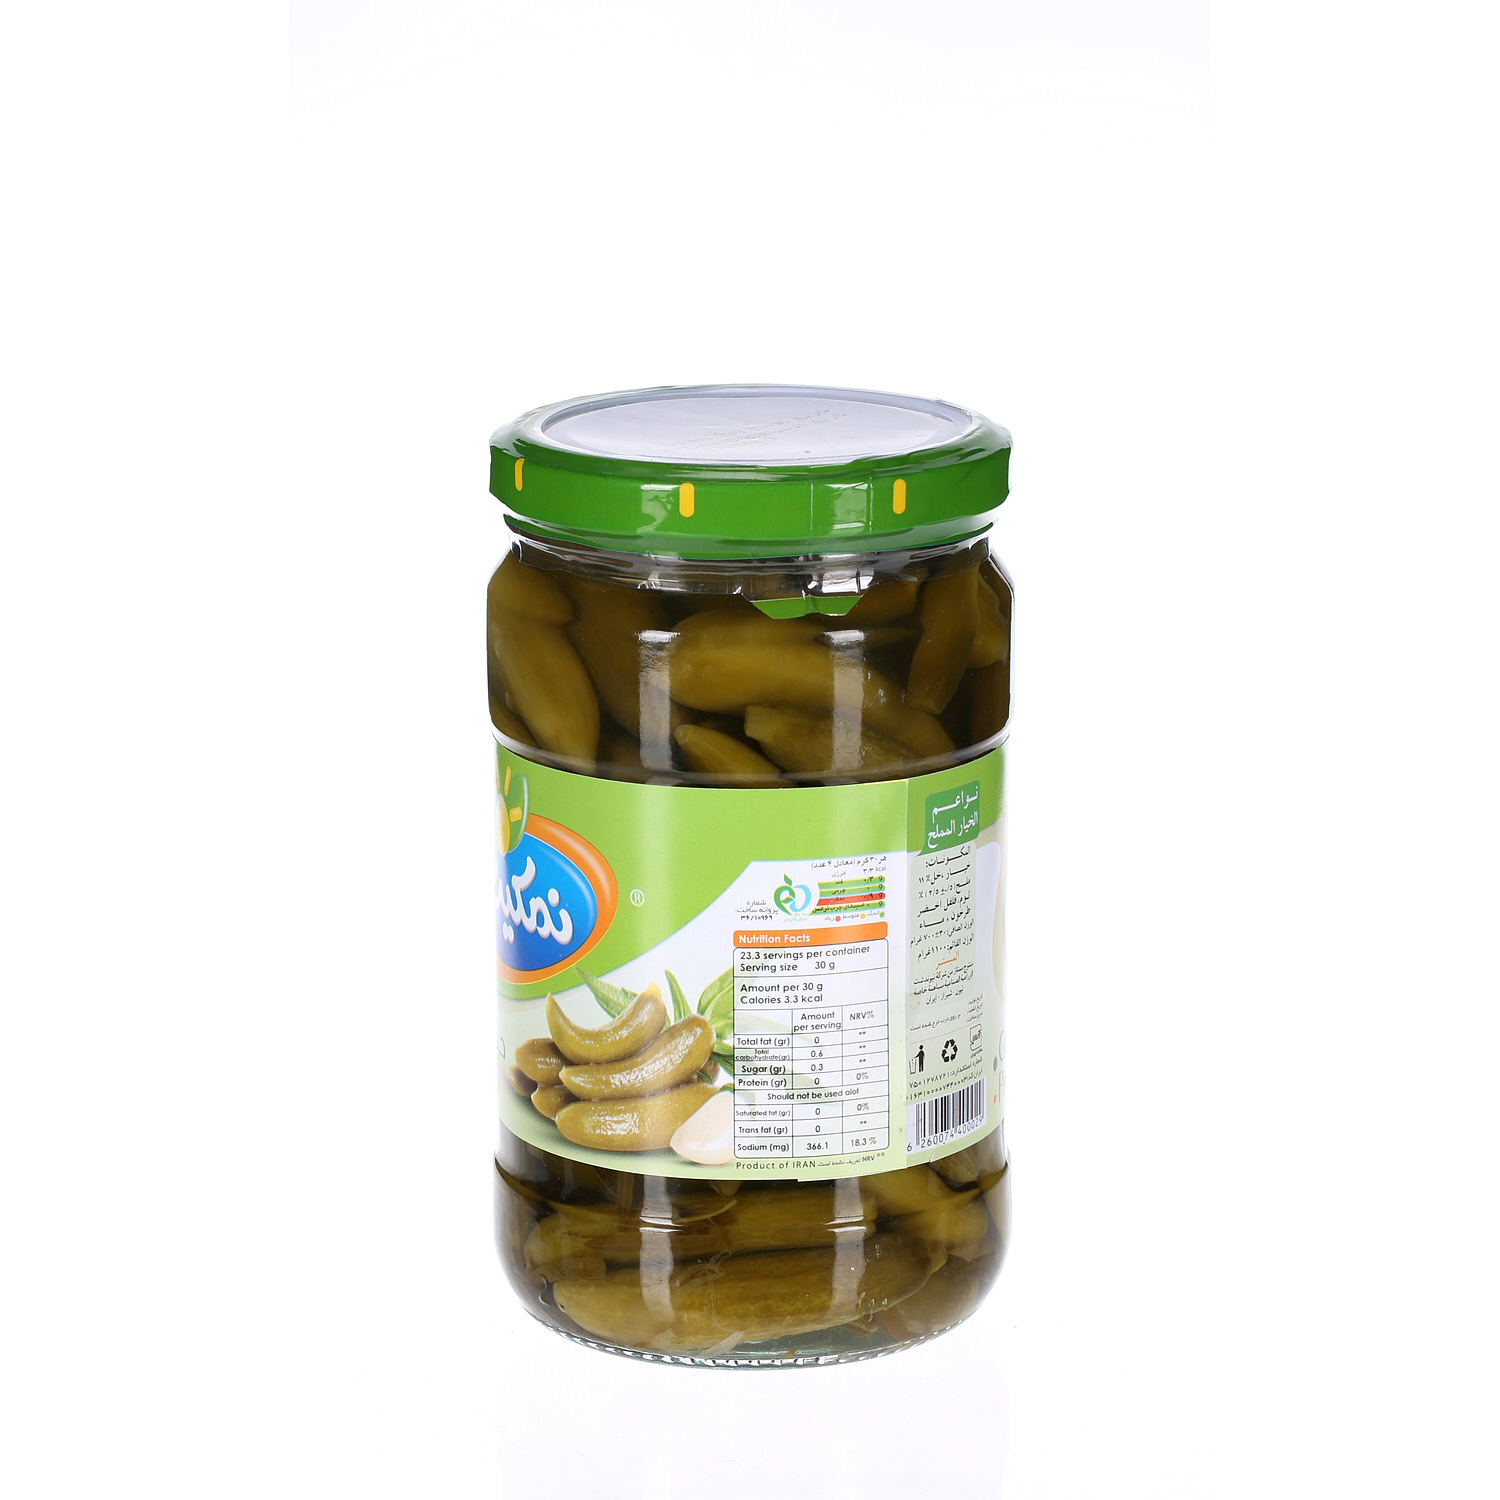 Namakin Pickle Cucumber Special Baby 1Kg